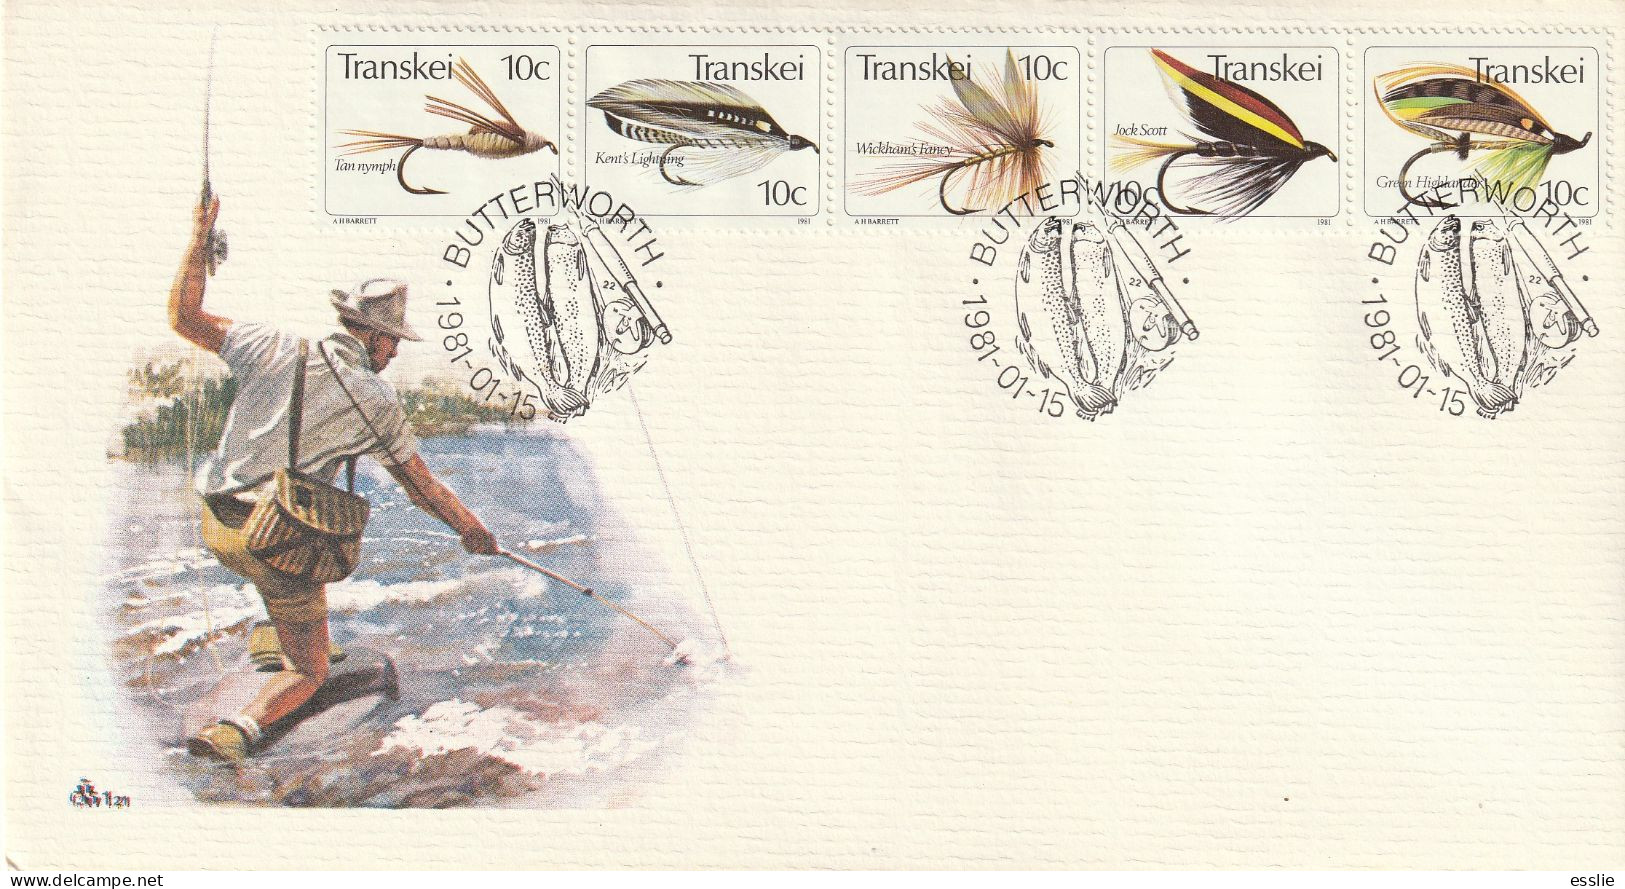 Transkei - 1981 - Fishing Flies Angling - First Day Cover - Small - Transkei